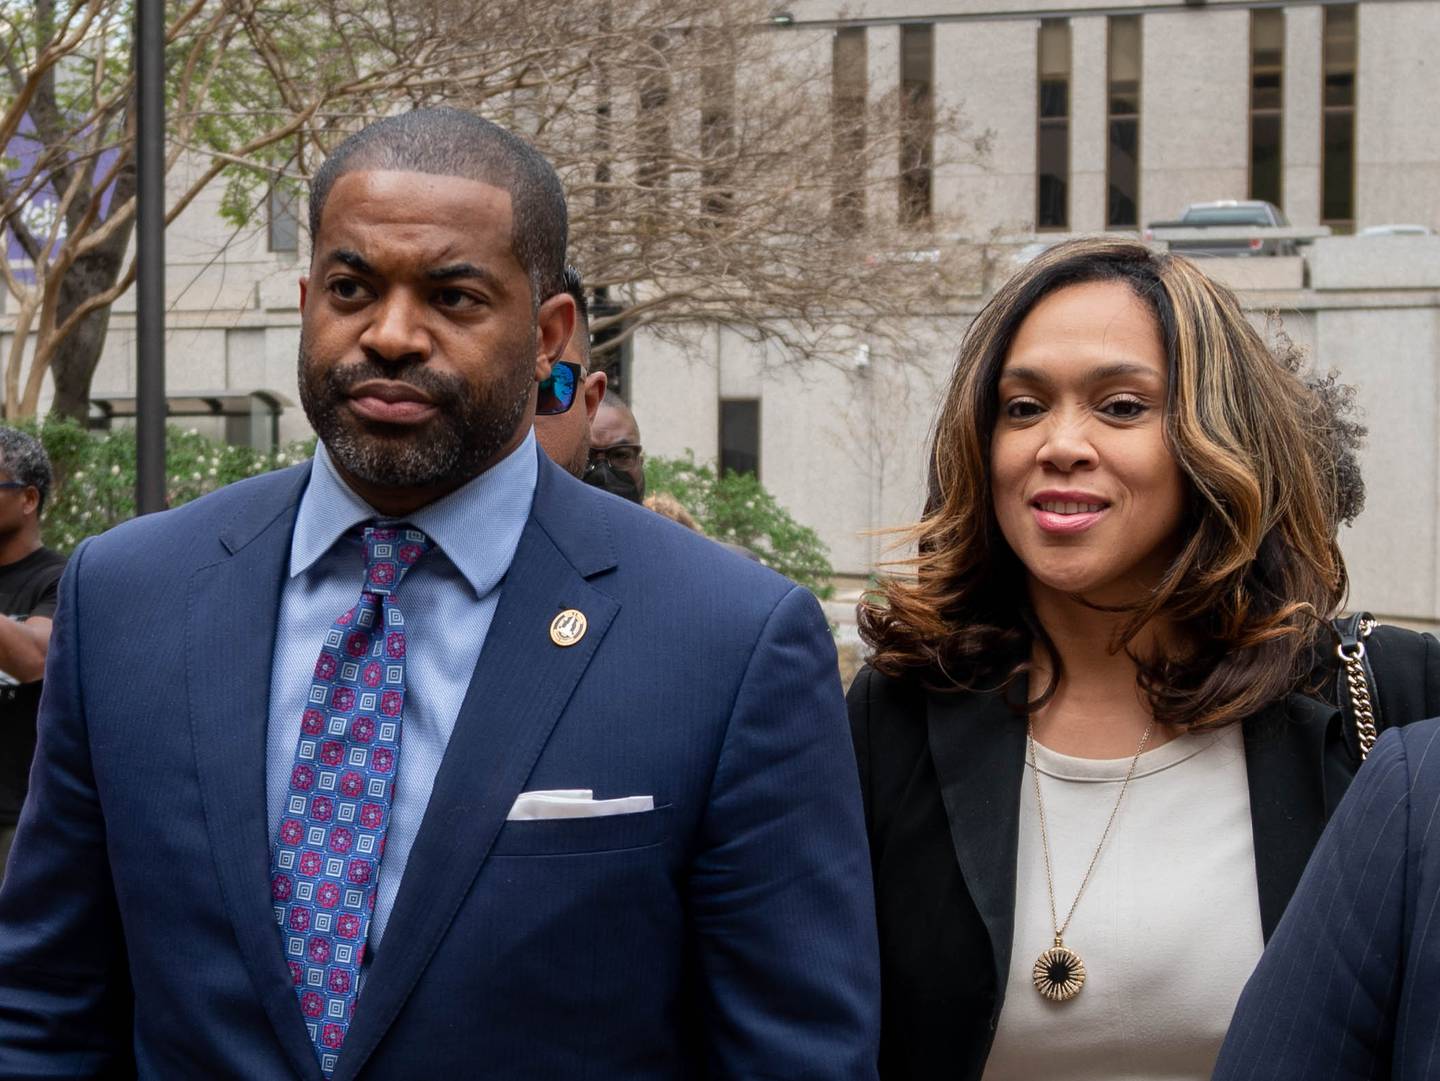 Marilyn Mosby motions hearing at 2 p.m at the federal courthouse downtown Baltimore on April 14, 2022. (Photo by Shan Wallace/The Baltimore Banner)